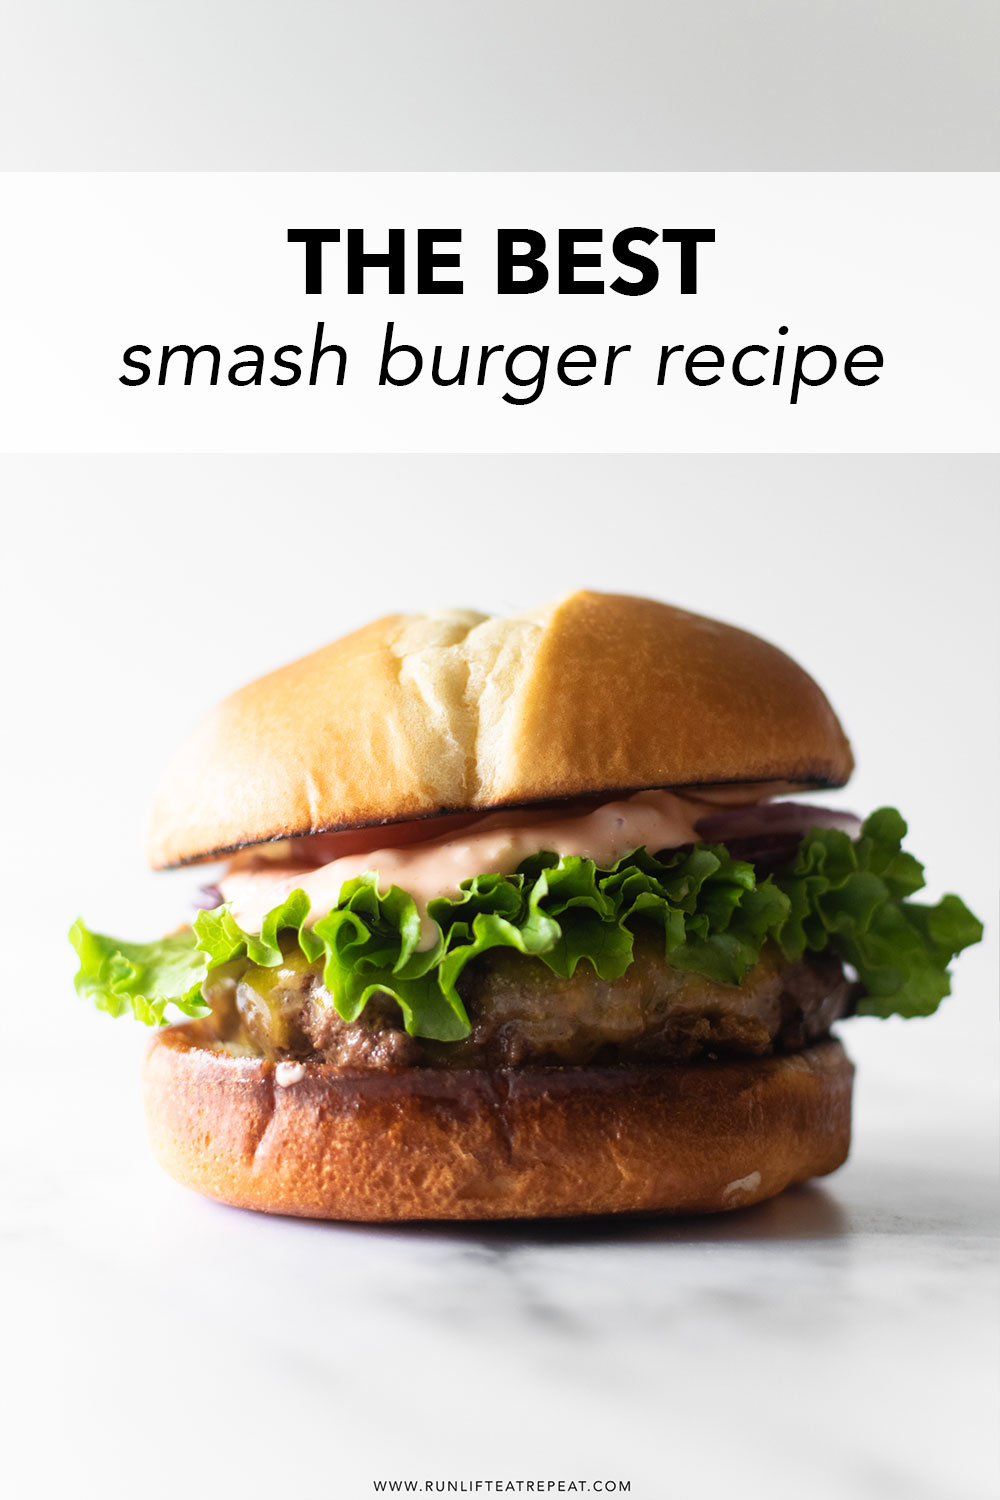 The best smash burger recipe— zero exaggeration! These burgers are incredibly juicy, perfectly crispy, smothered in cheese, and topped with a hefty amount of secret sauce. Serve between a toasted brioche bun and this is truly the ultimate smash burger recipe.